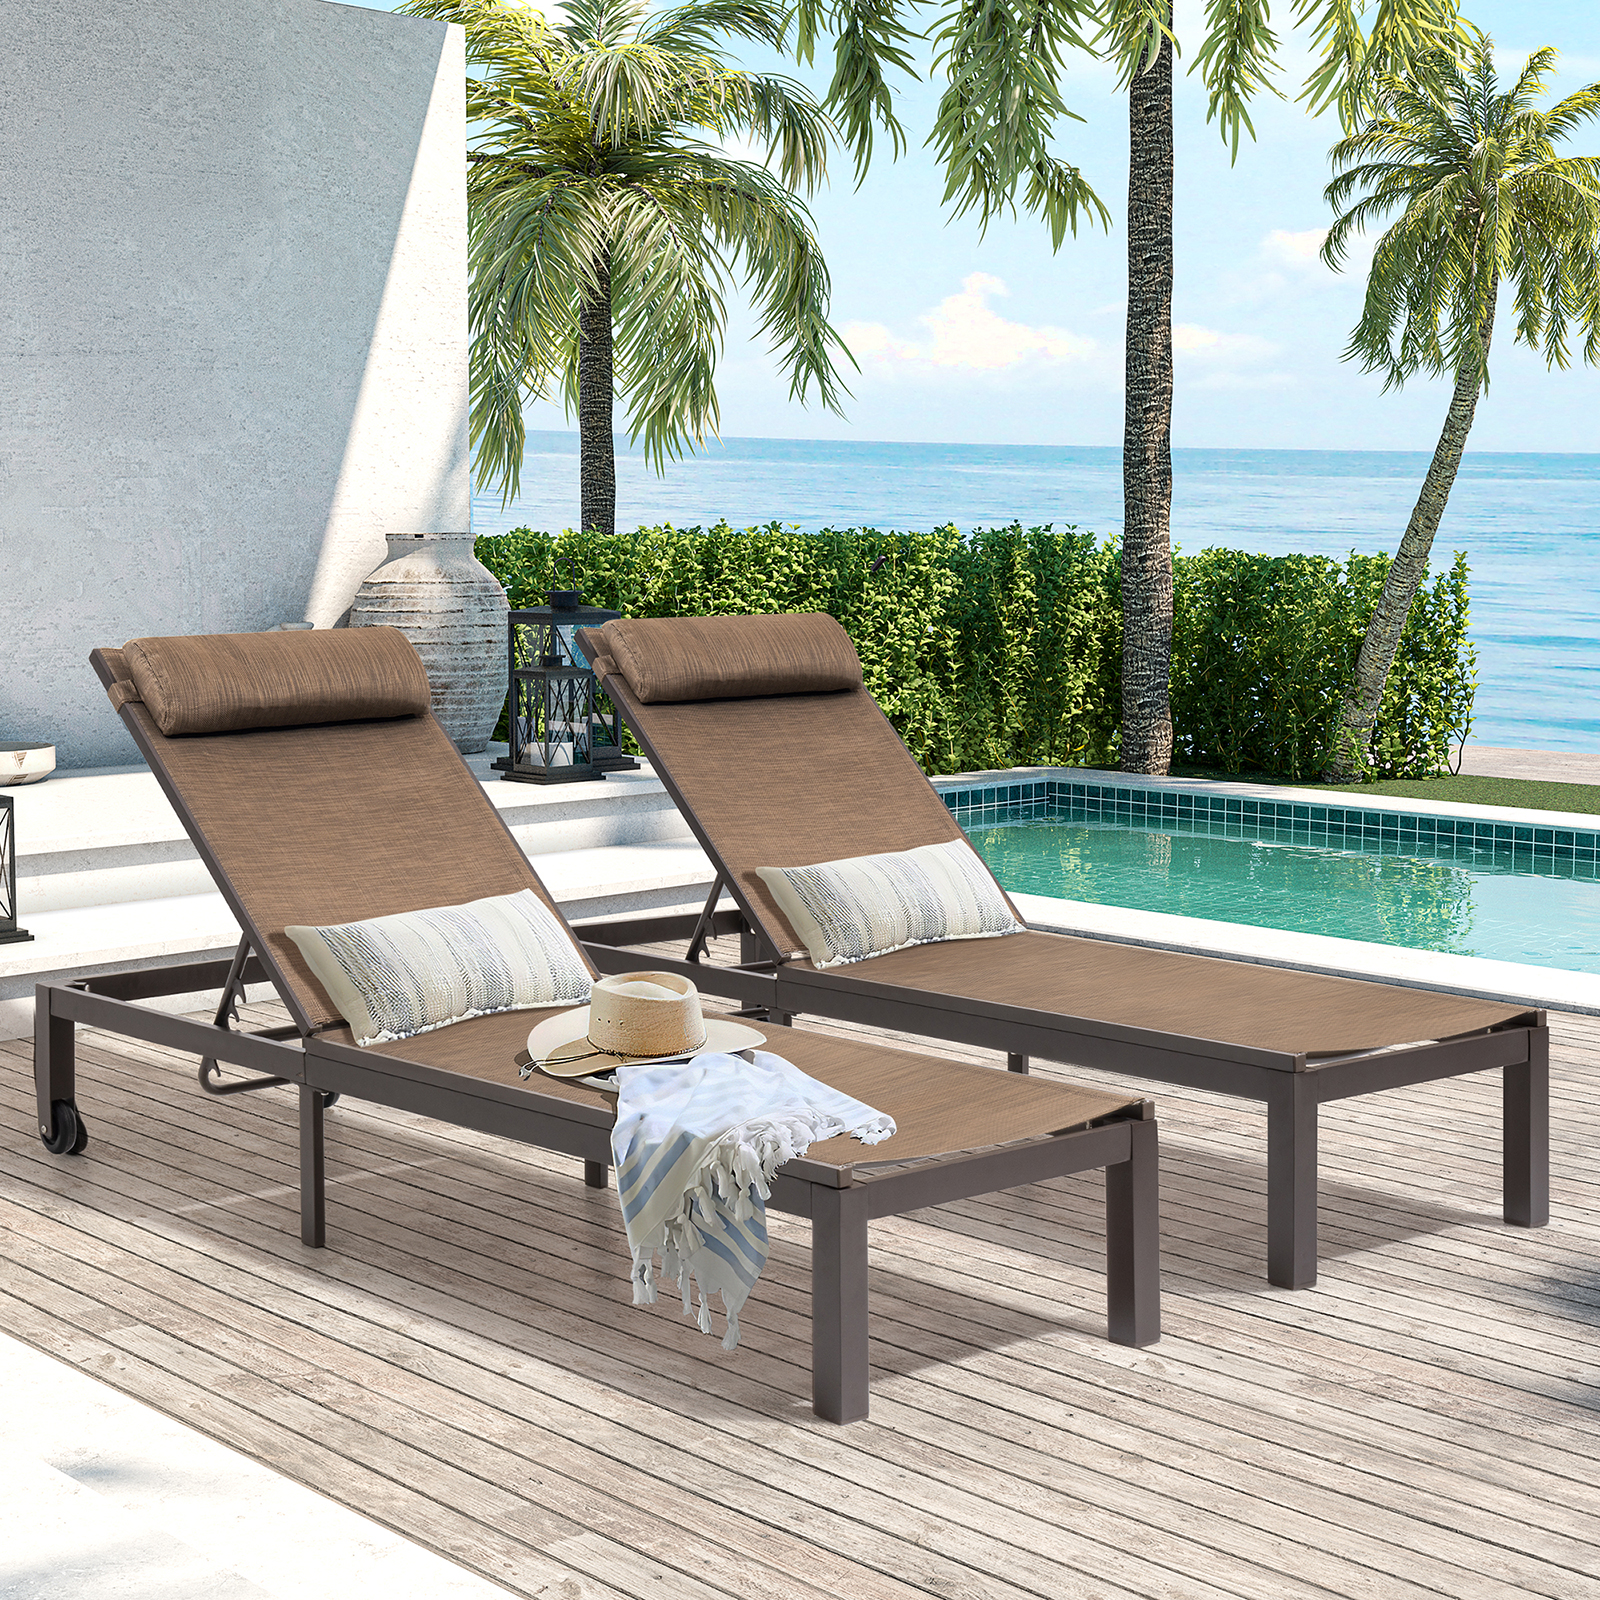 Crestlive Products Brown  Aluminium Adjustable Patio Pool Chaise Lounge Chairs (Set of 2) - image 5 of 7